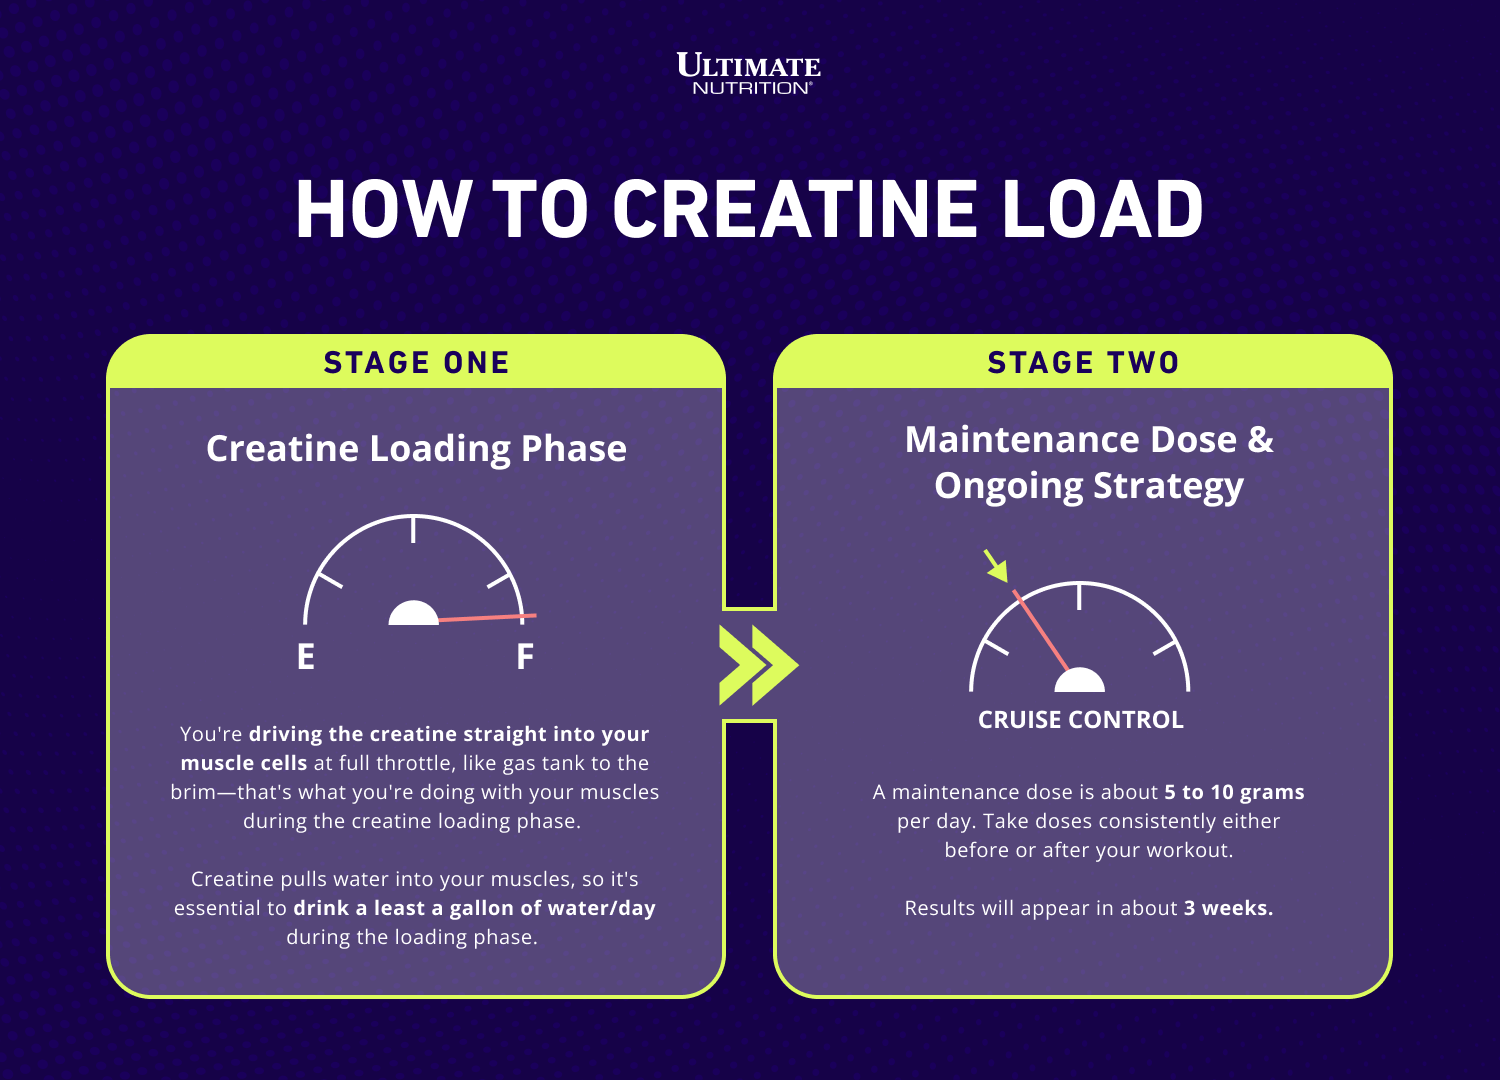 How to Creatine Load Infographic